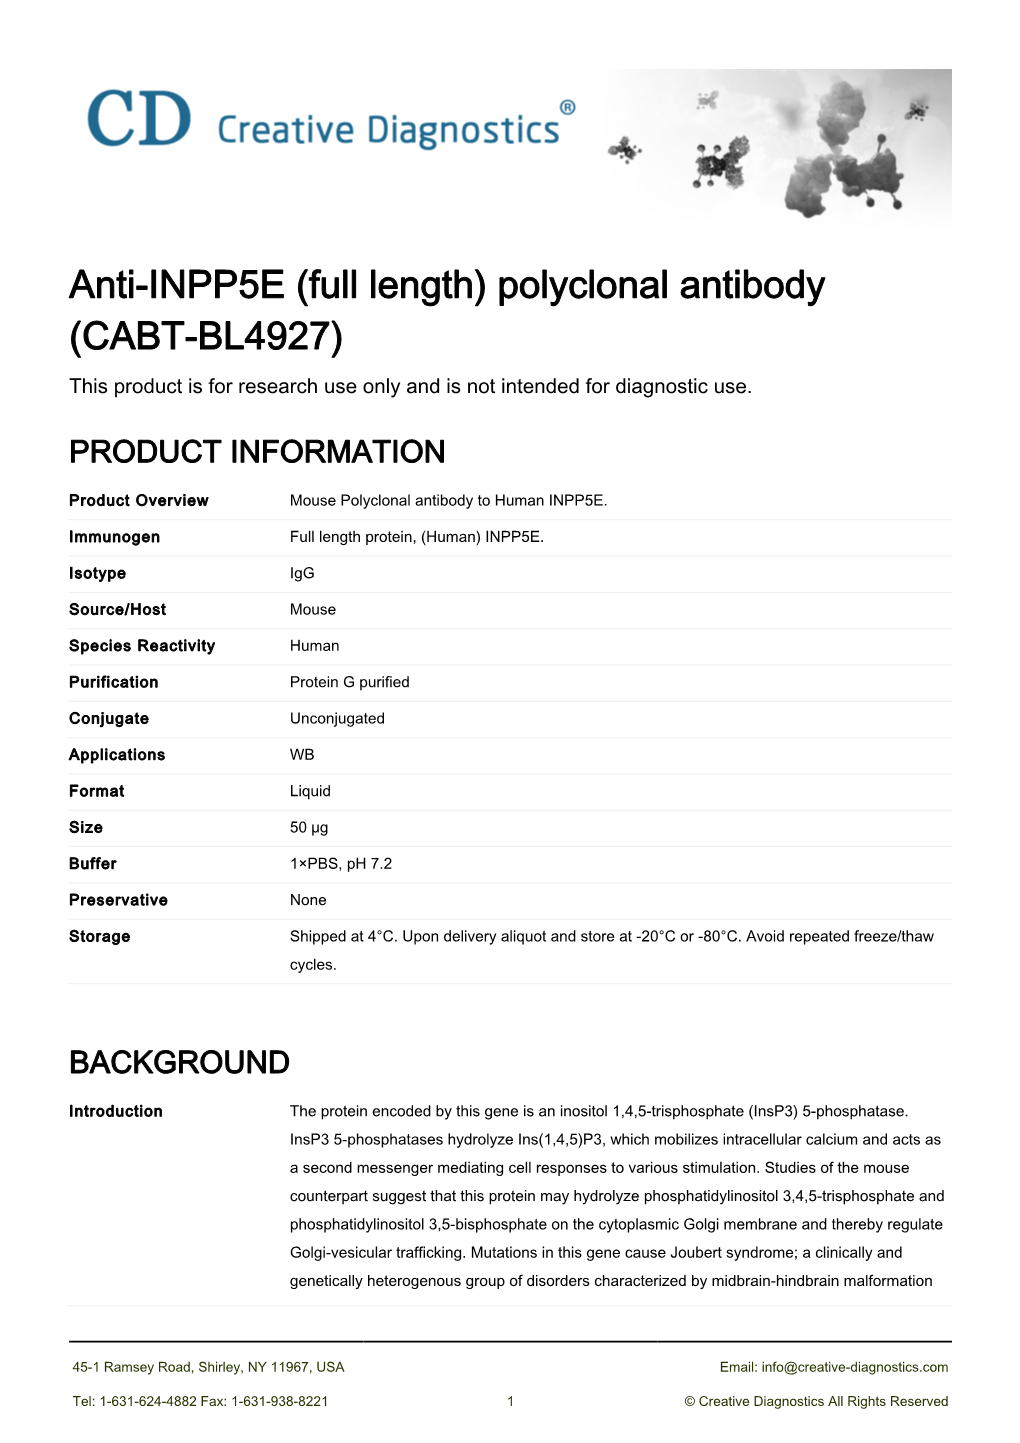 Anti-INPP5E (Full Length) Polyclonal Antibody (CABT-BL4927) This Product Is for Research Use Only and Is Not Intended for Diagnostic Use